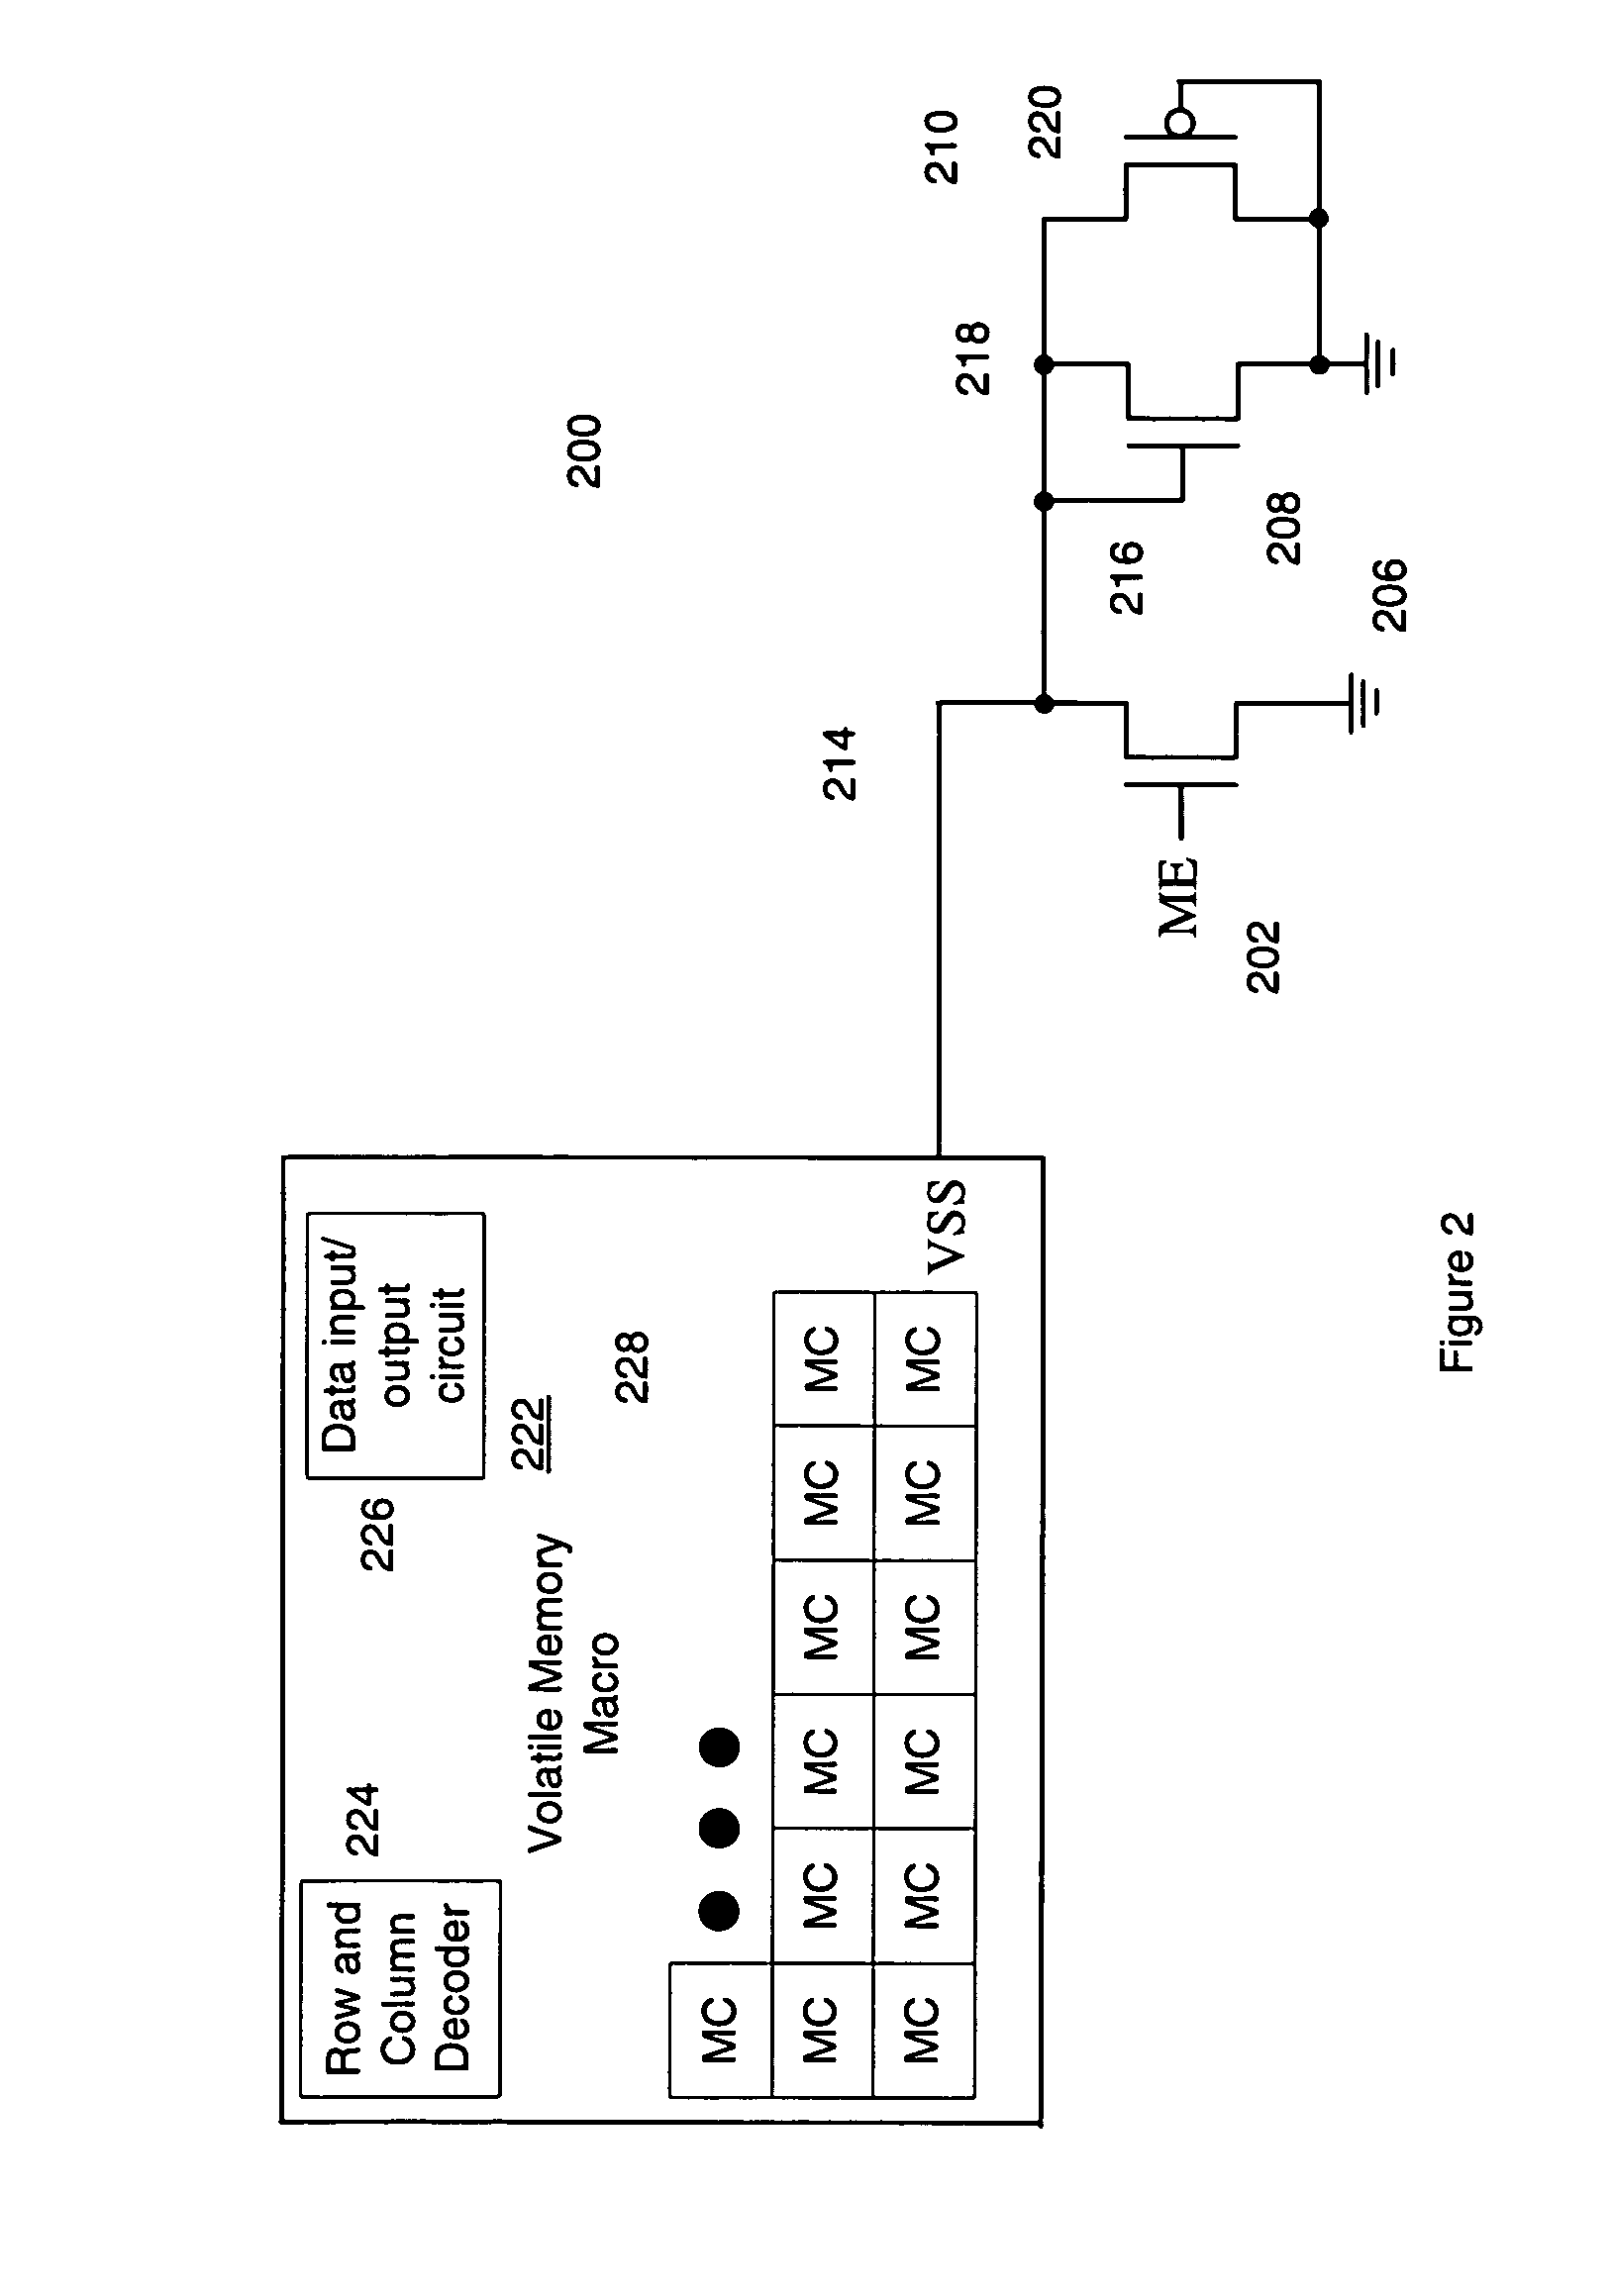 Methods and apparatuses for memory array leakage reduction using internal voltage biasing circuitry